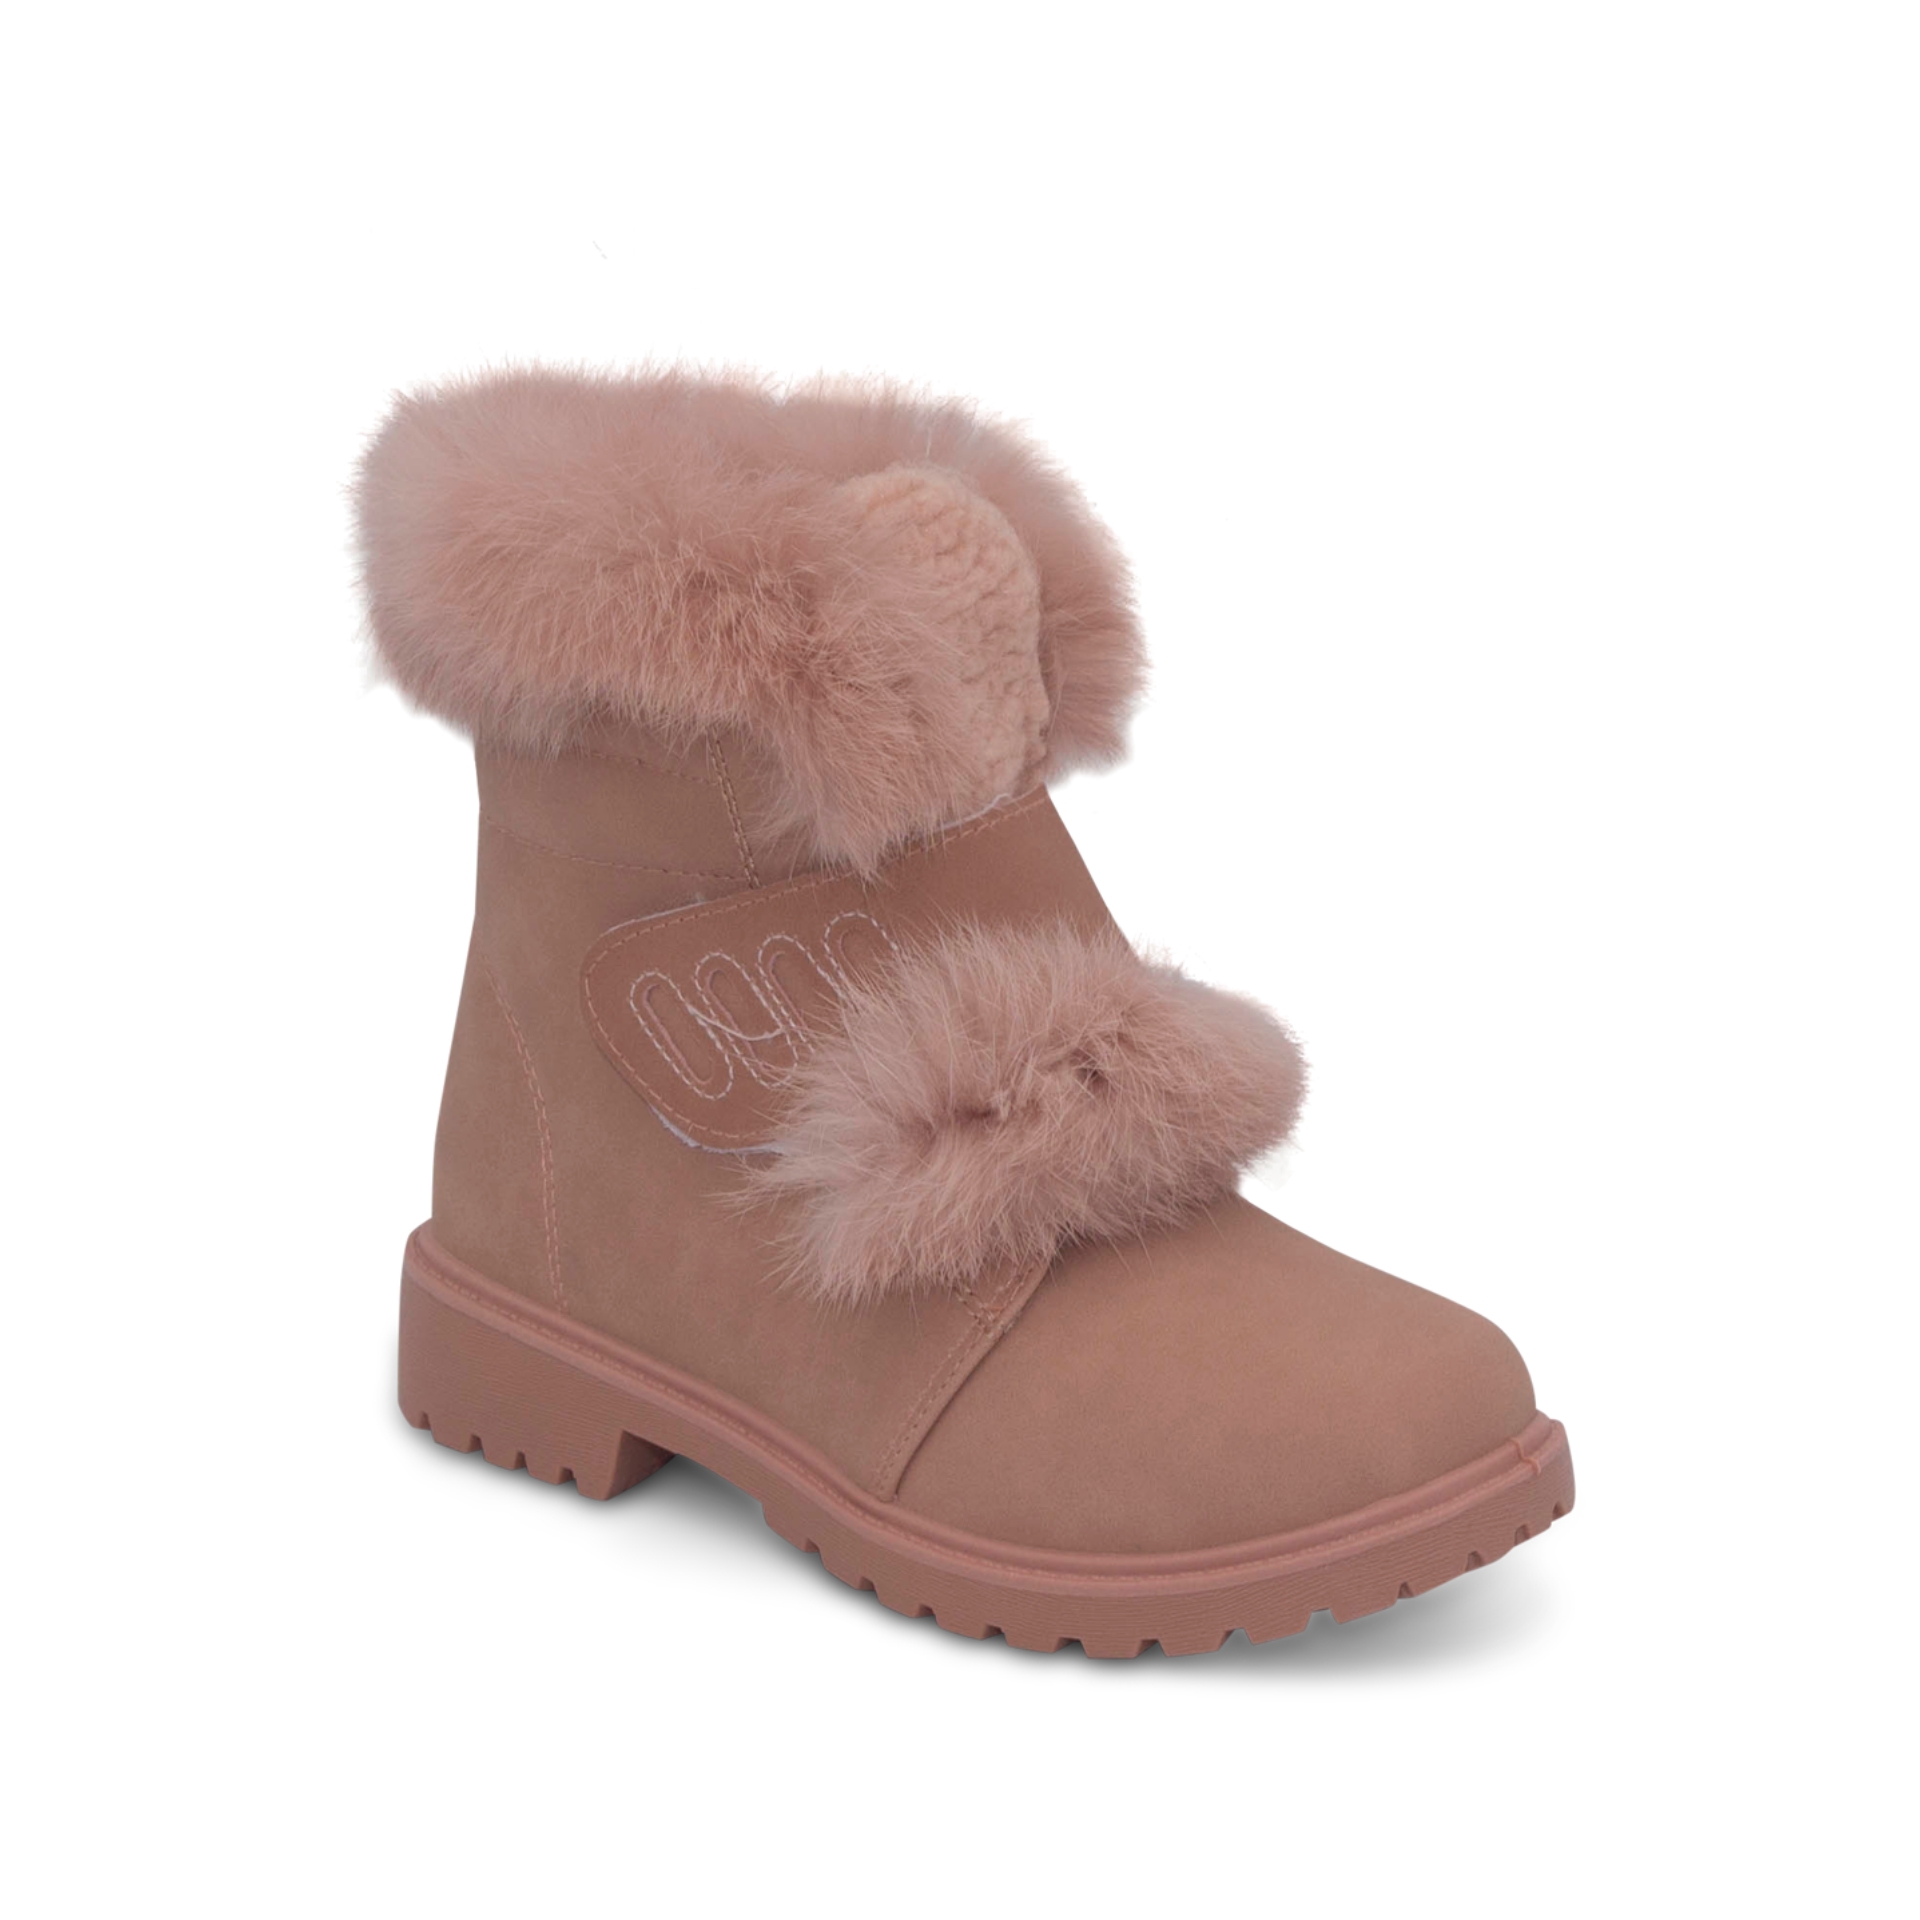 Kids Fluffy Winter Boots R501 | Rentoes